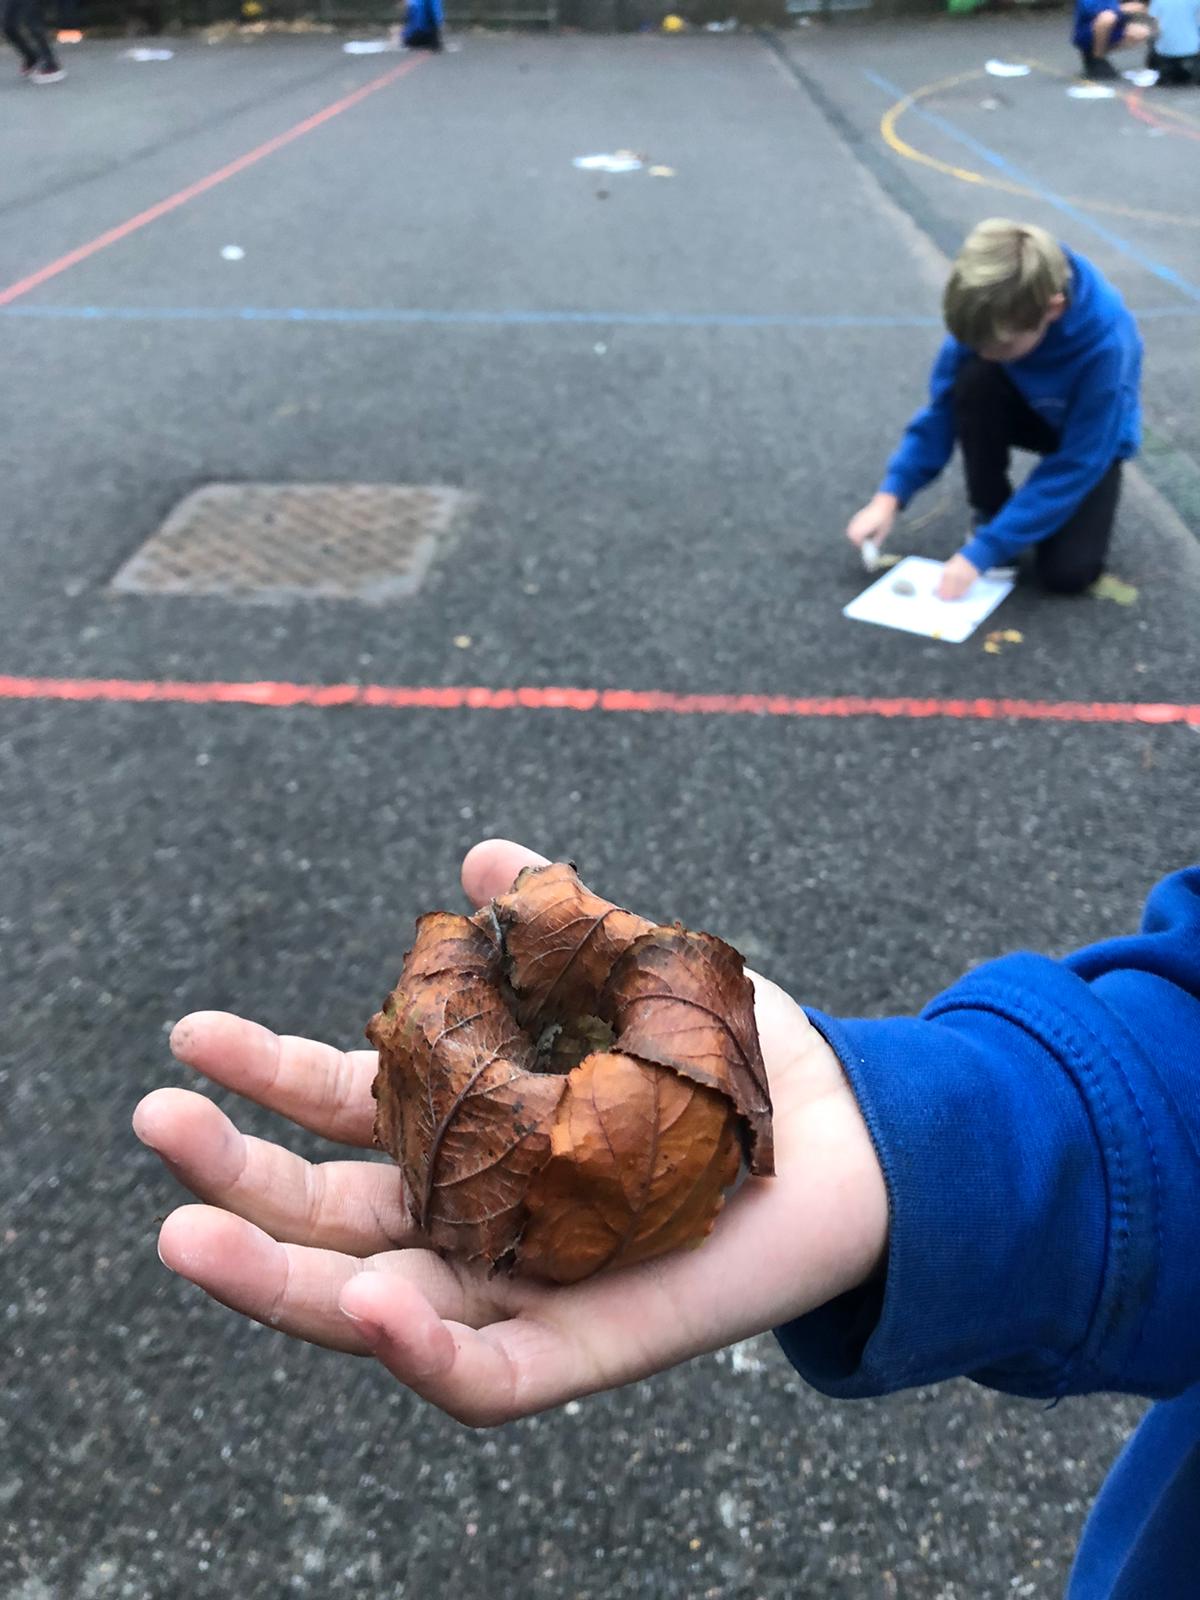 Leaf Bowls - The Outdoors Project - autumn term 2022